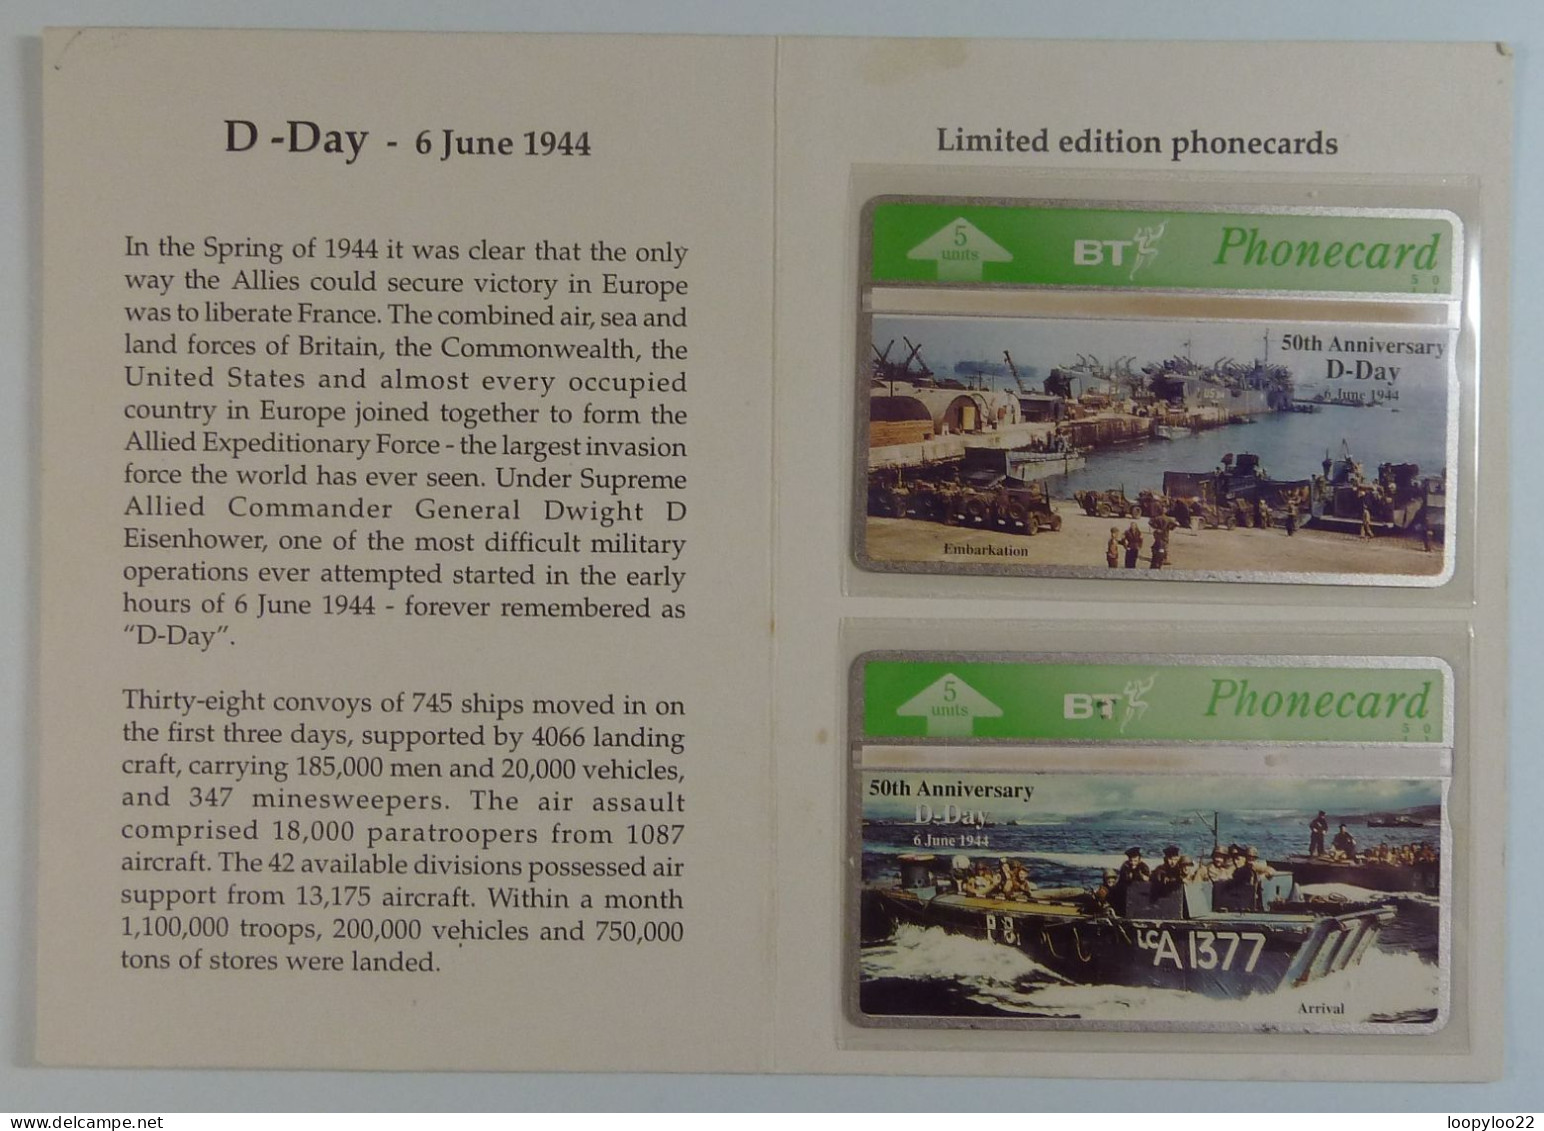 UK - BT - L&G - 50th Anniversary - D-DAY - 1944 - 405B & Without Control - 500ex - Limited Edition - Mint In Folder - BT General Issues